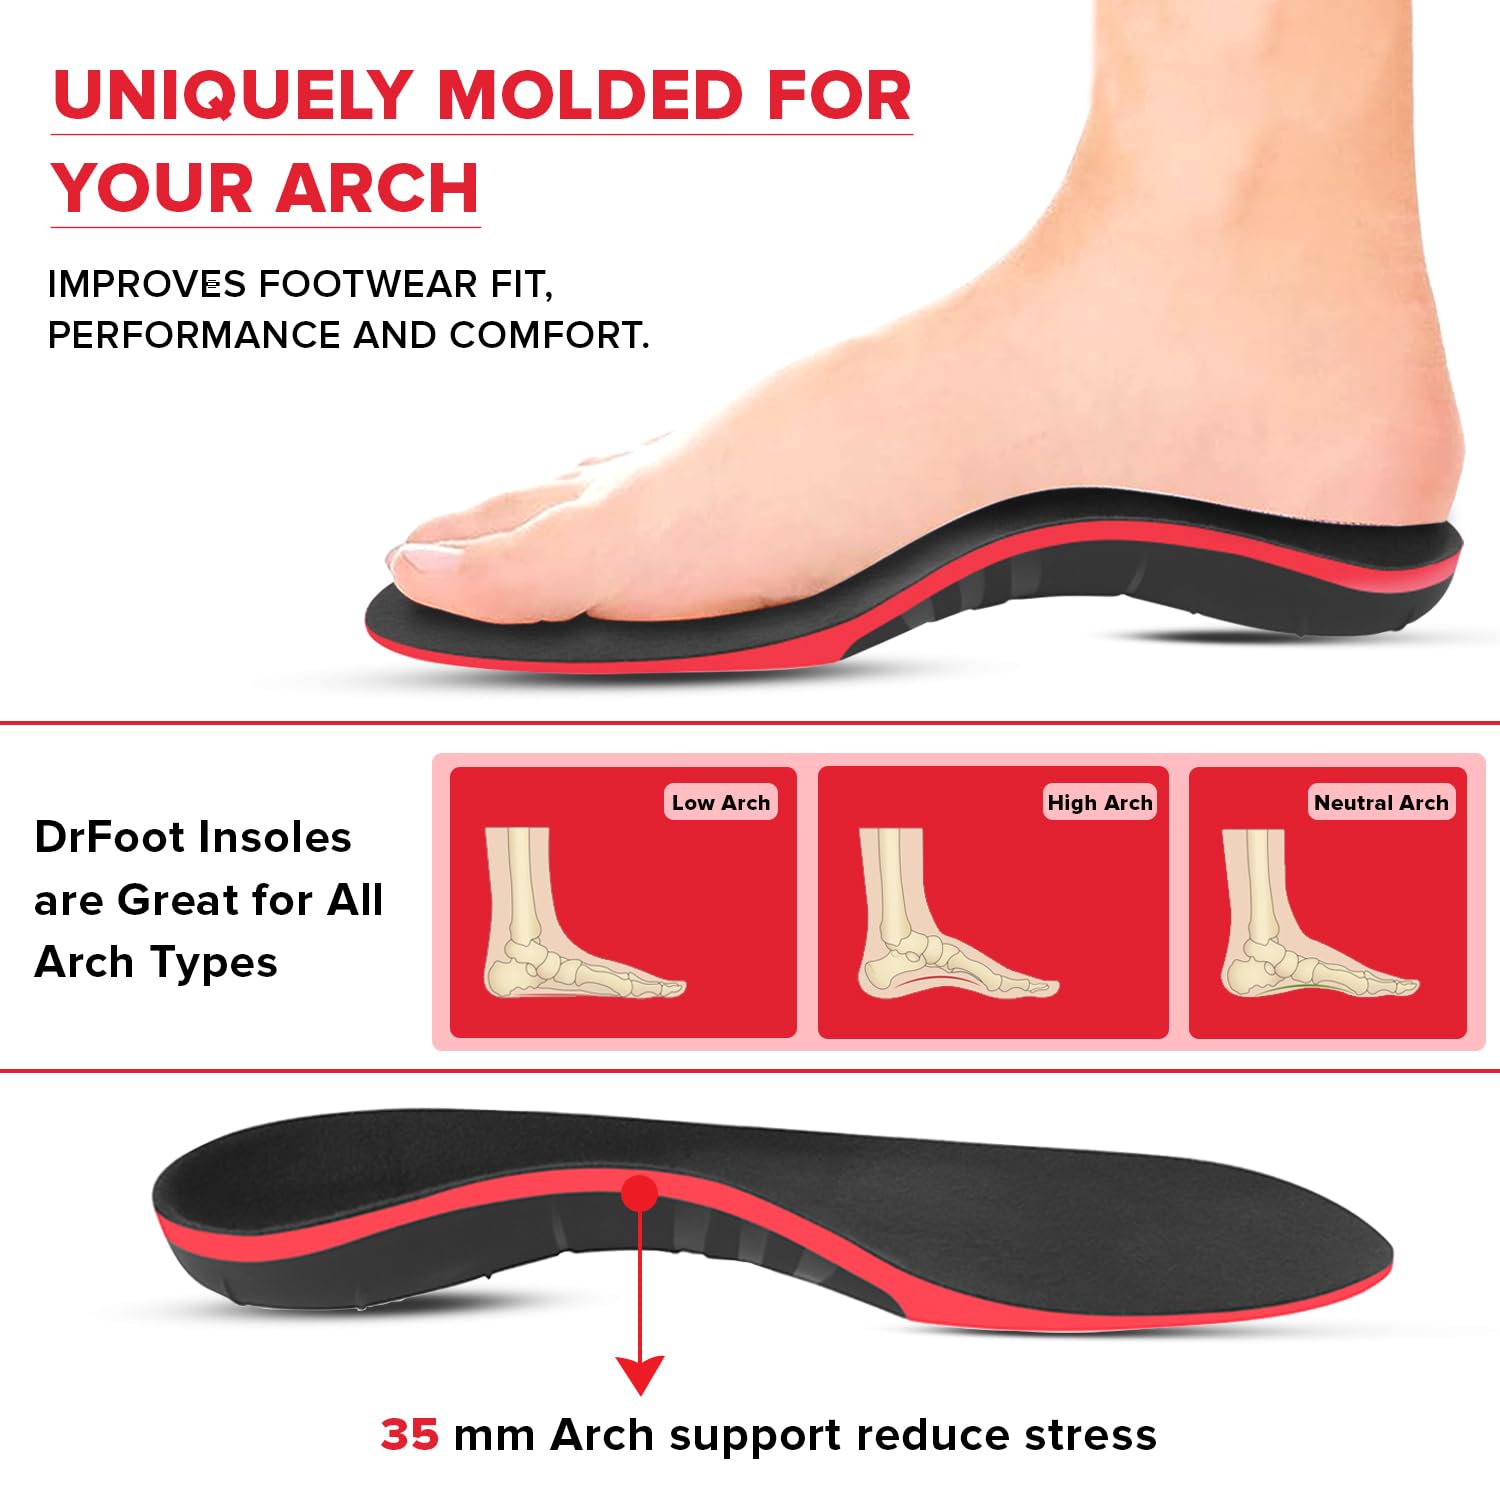 Dr Foot High Arch Support Insoles | Shoe Inserts For Plantar Fasciitis, Flat Feet, Feet Pain, Heel Spur Pain |For All Day Comfort & Support & Shock Absorption| For Men and Women -1 Pair (Medium Size)